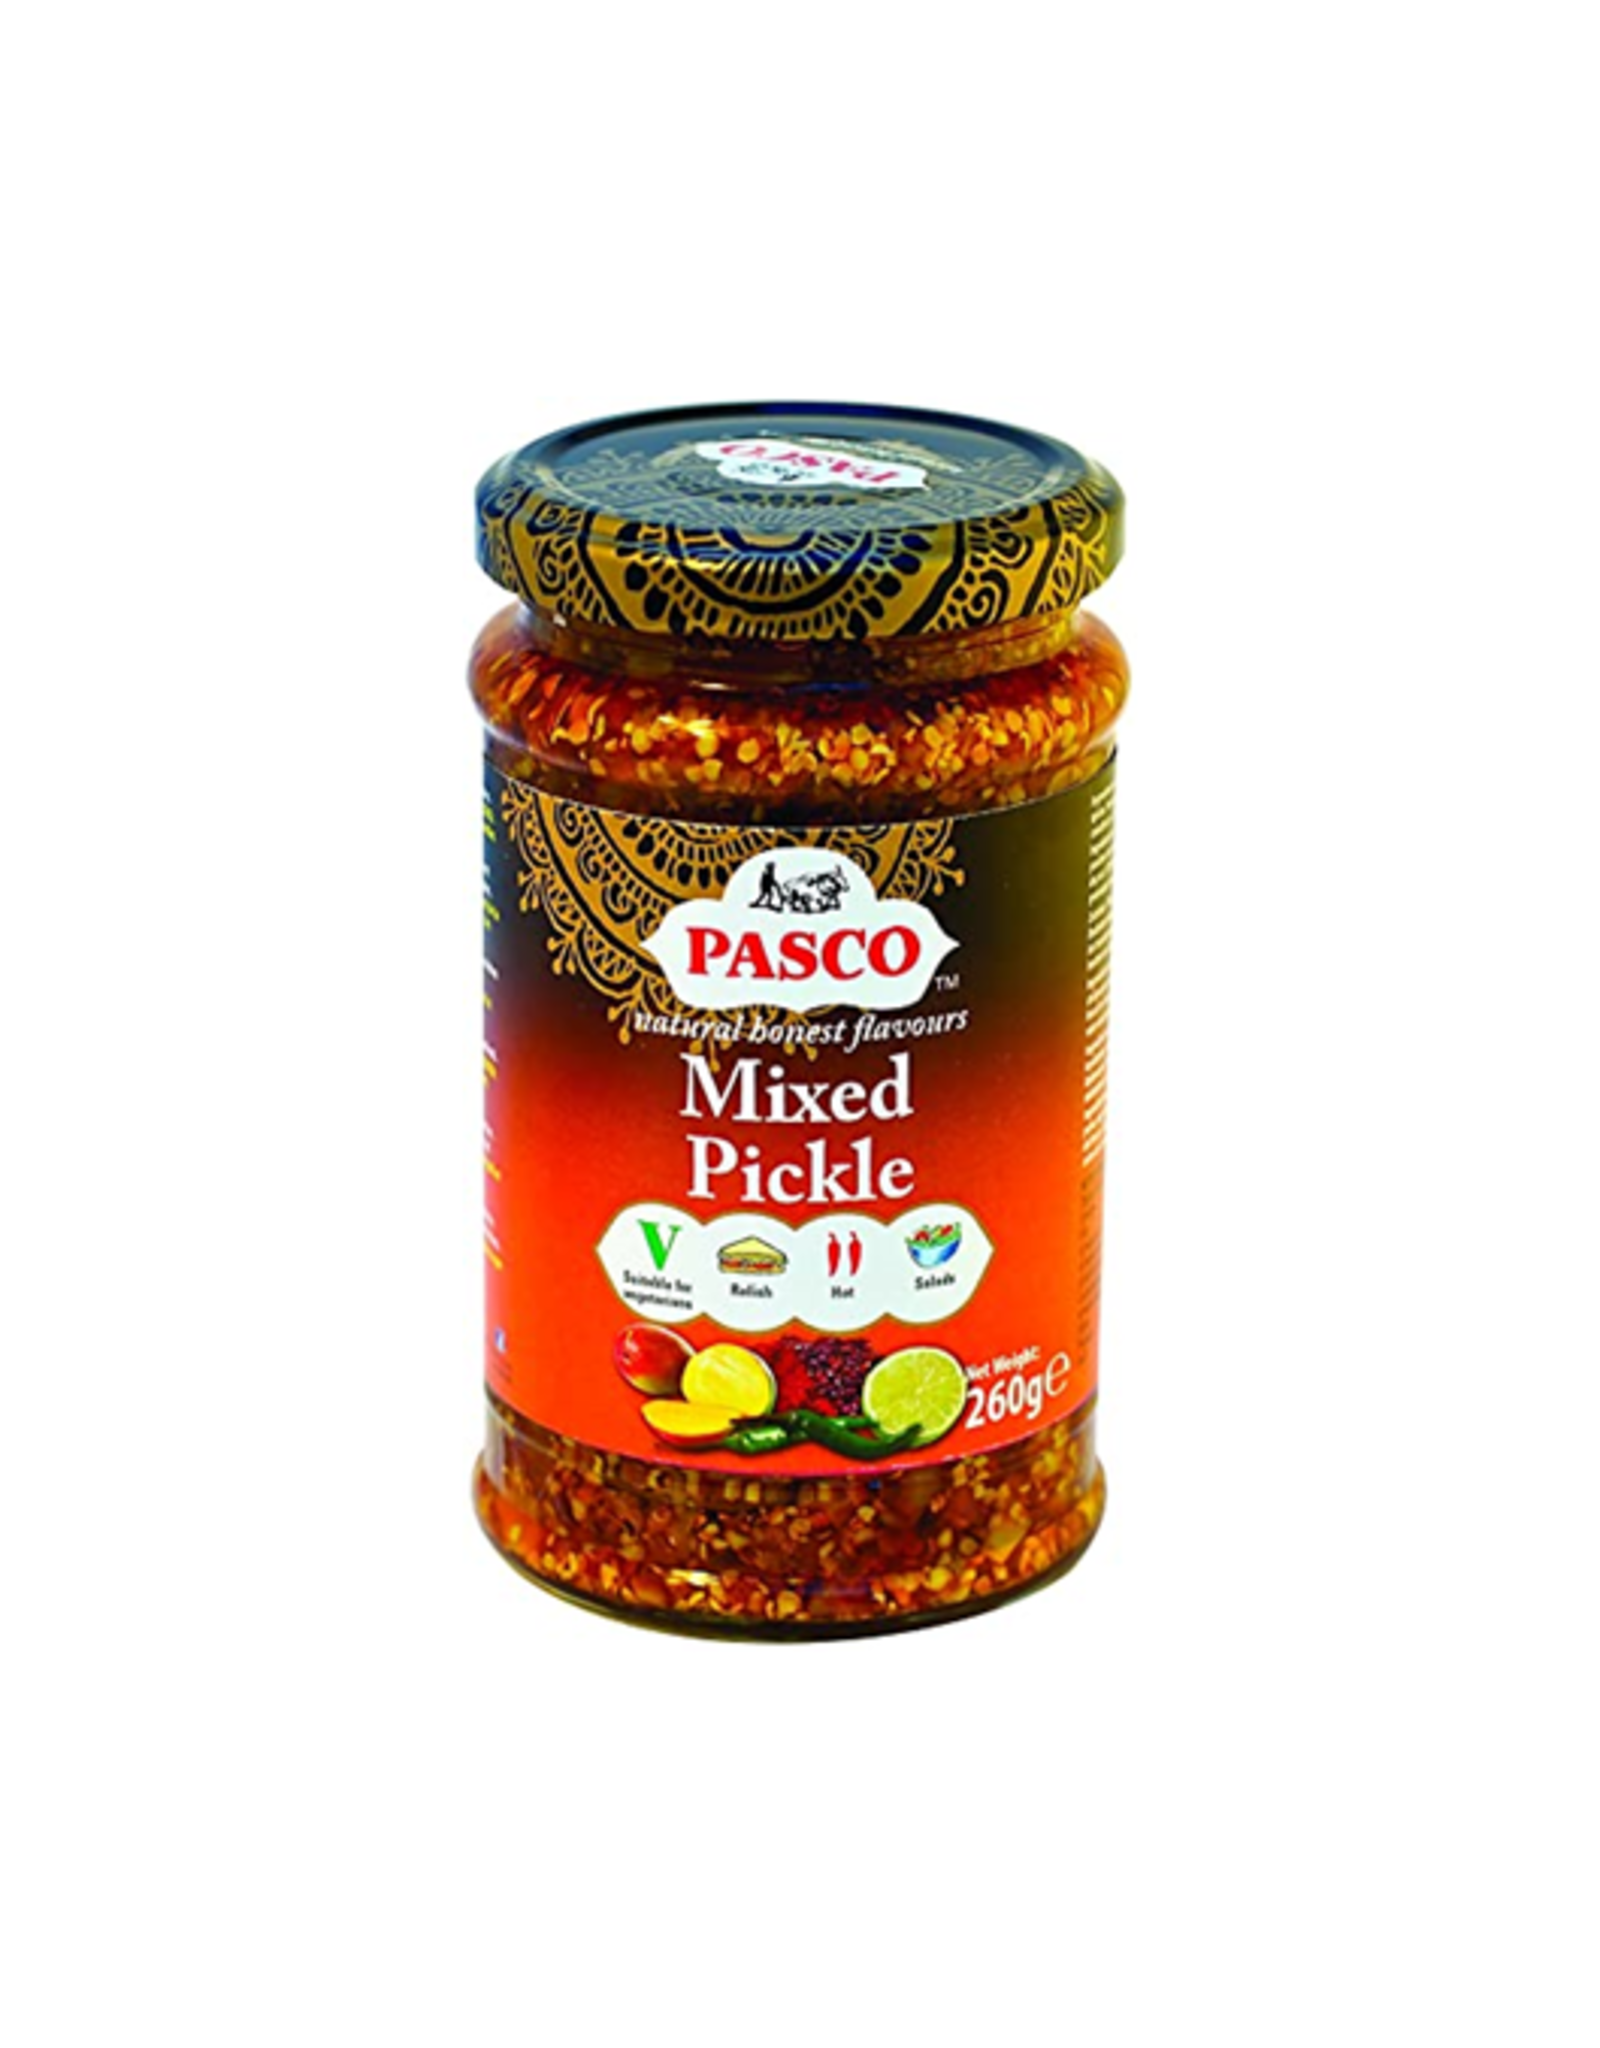 Pasco Mixed Pickle